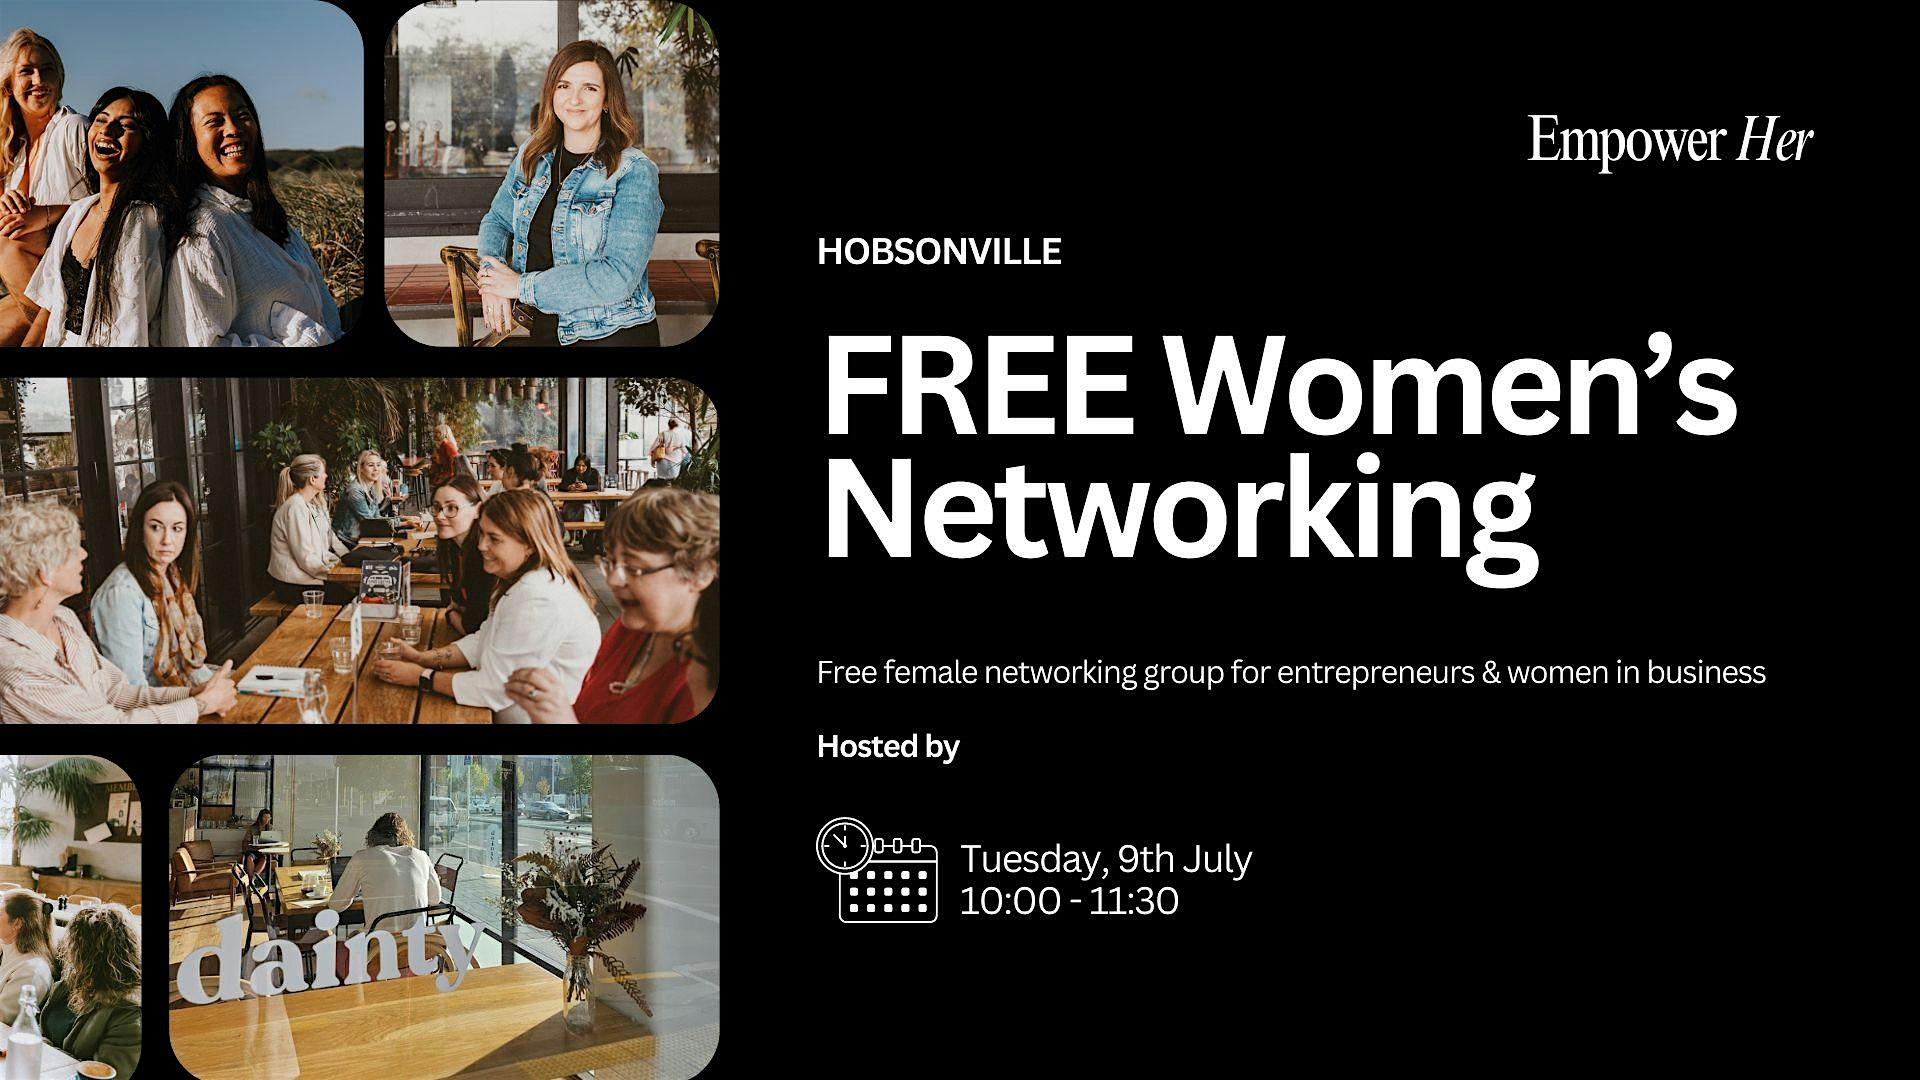 Hobsonville - Empower Her Networking  FREE Women's Business Networking July